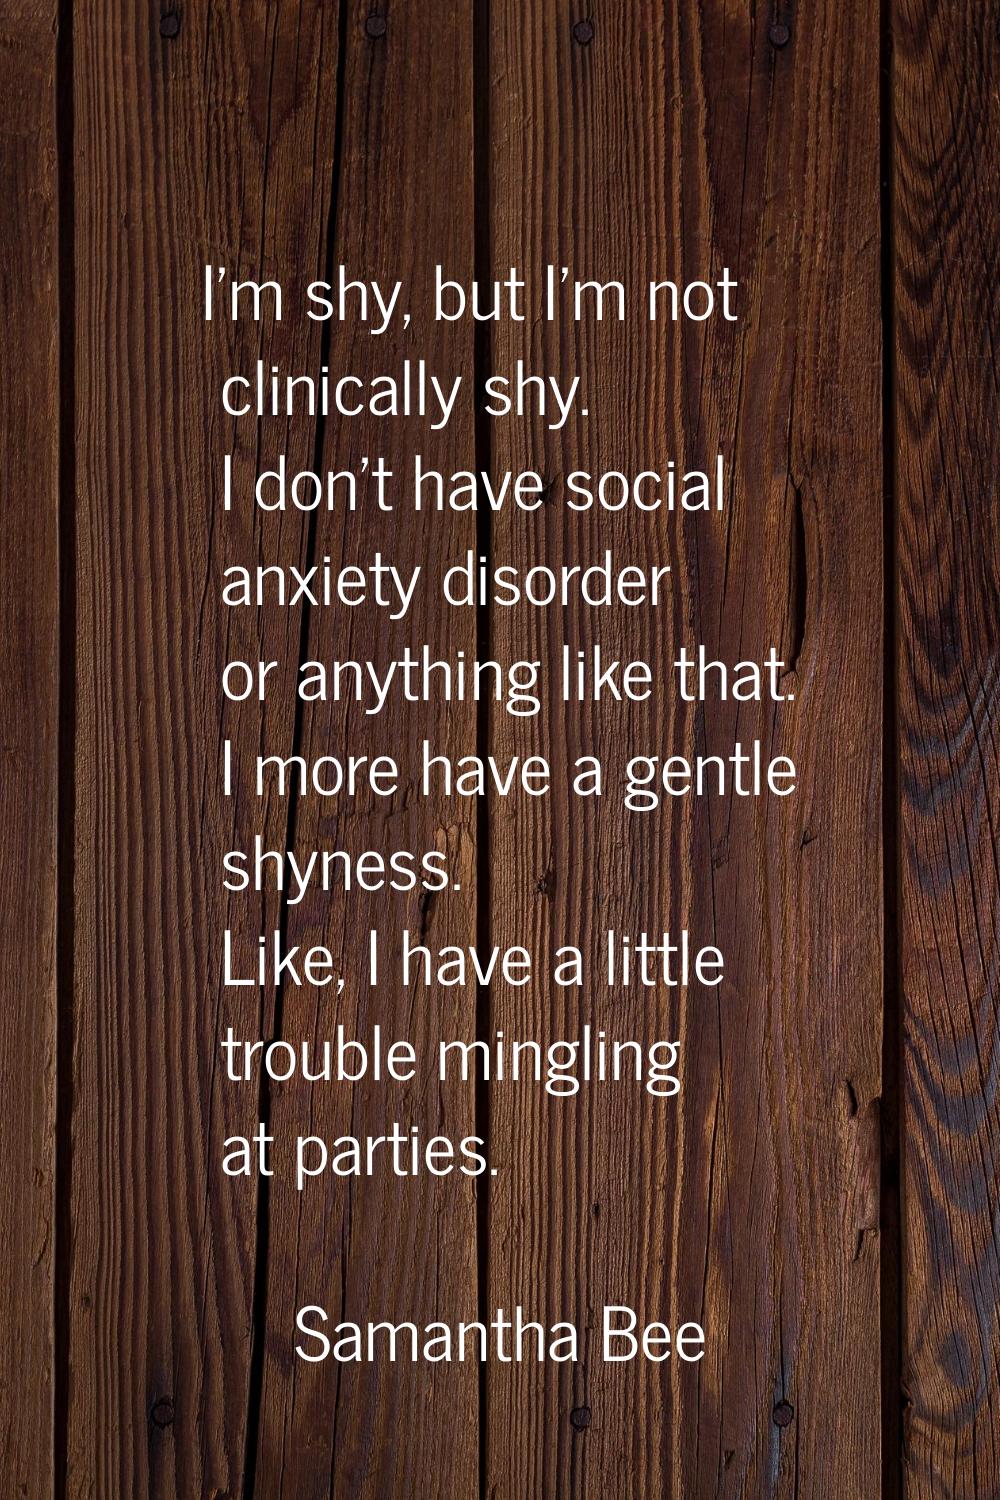 I'm shy, but I'm not clinically shy. I don't have social anxiety disorder or anything like that. I 